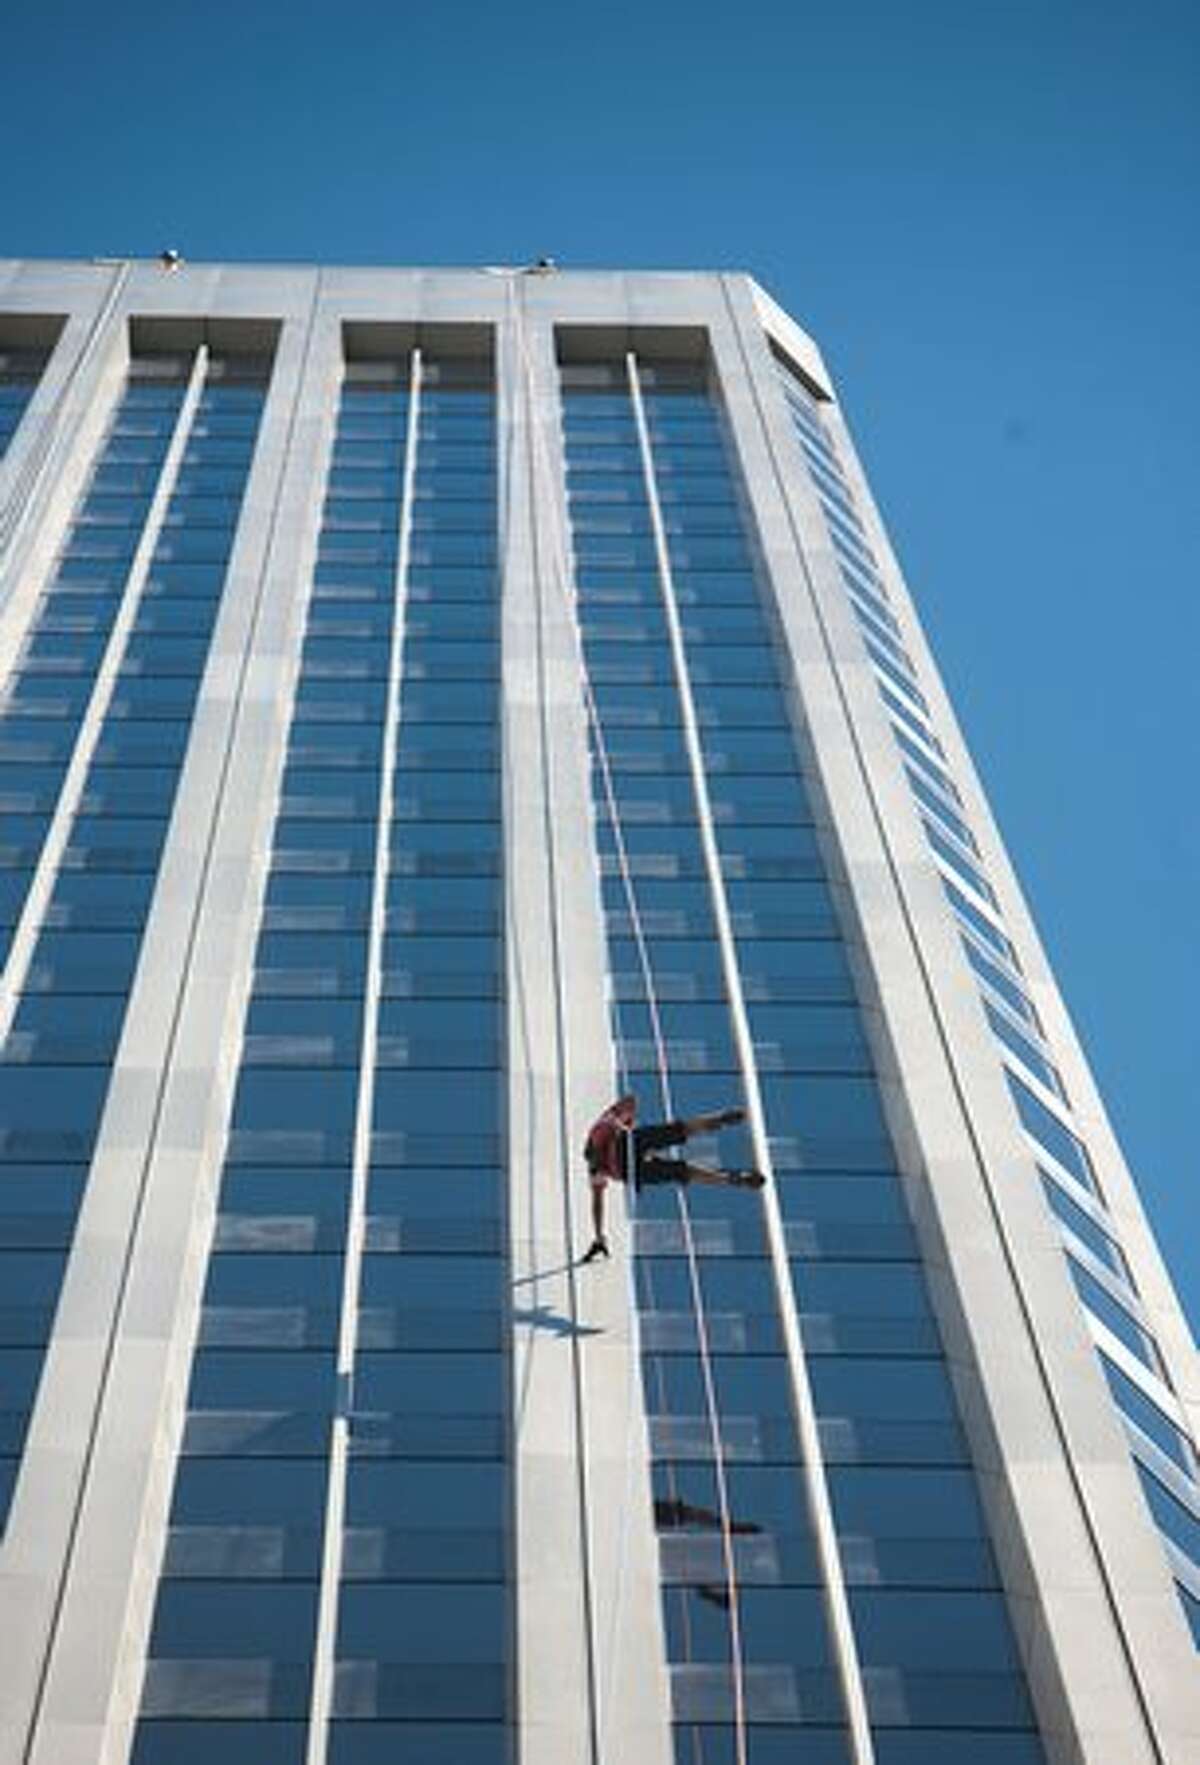 A rappeller reaches out to touch the building during "Over the Edge," a fundraiser for Special Olympics Washington. To earn a spot, rappellers had to raise $1,000 for Special Olympics Washington.